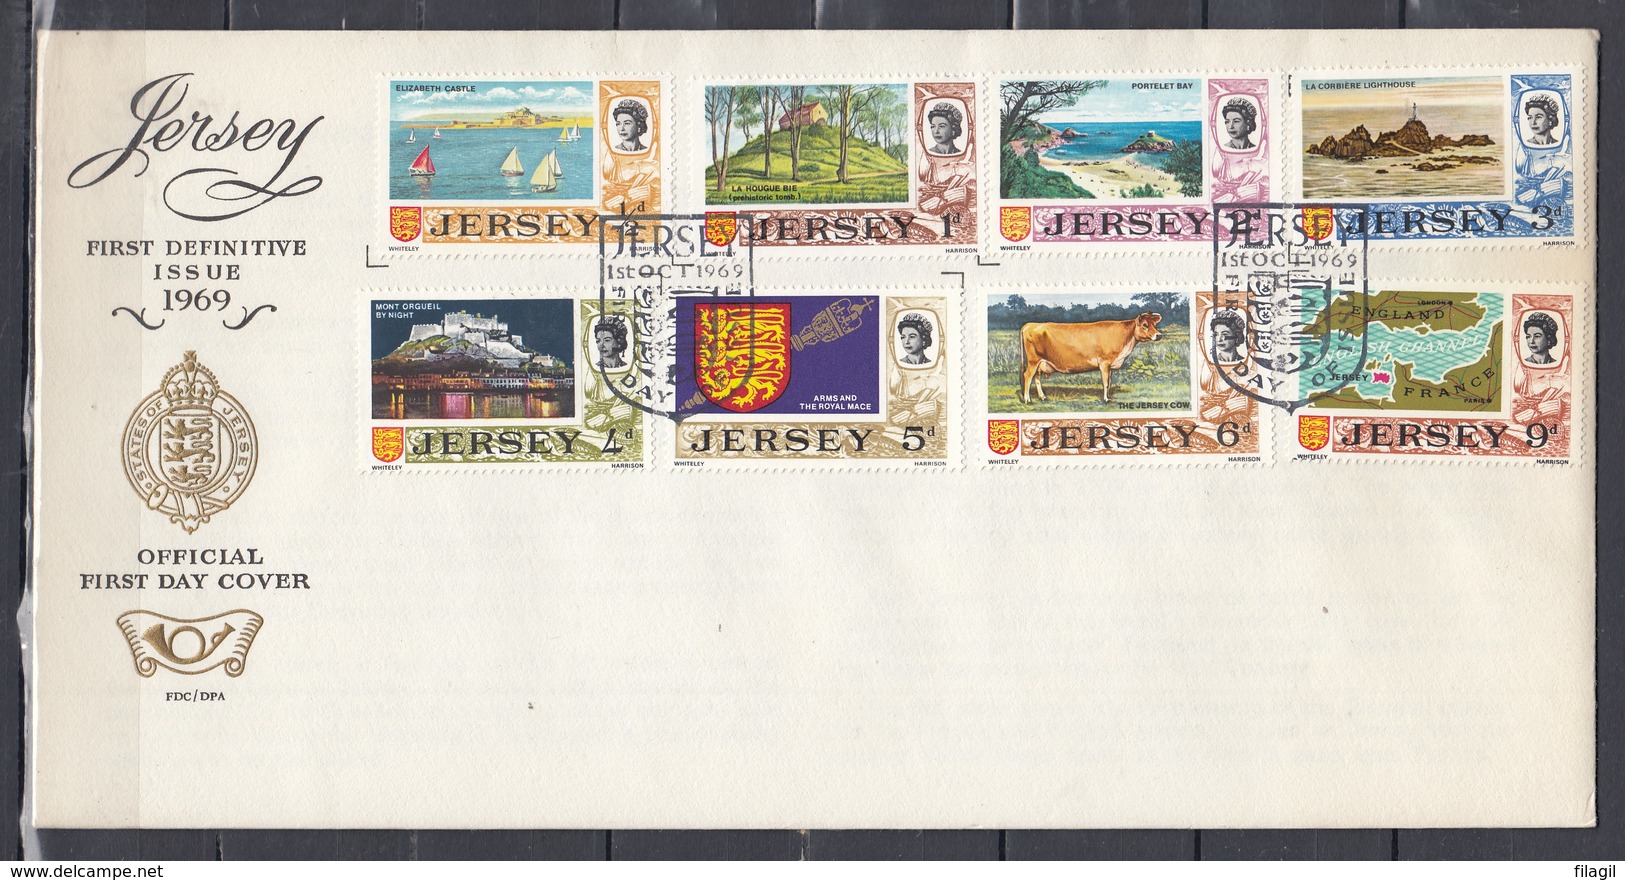 Fdc Jersey - First Definitive Issue 1969 (1 Ocotober 1969) - Jersey